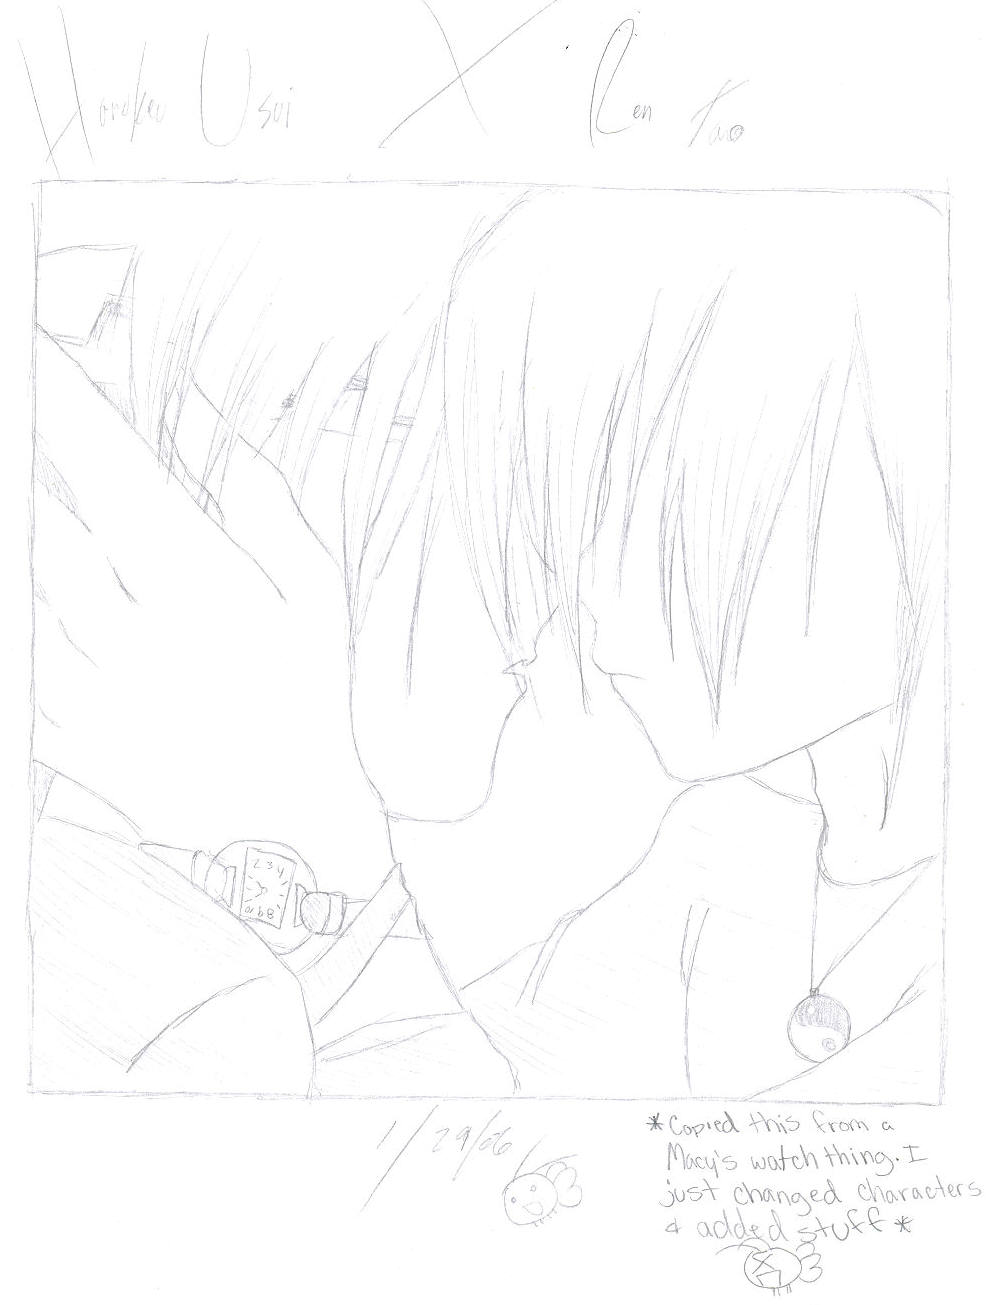 &#9829;About to Kiss&#9829; by kamoku_hito